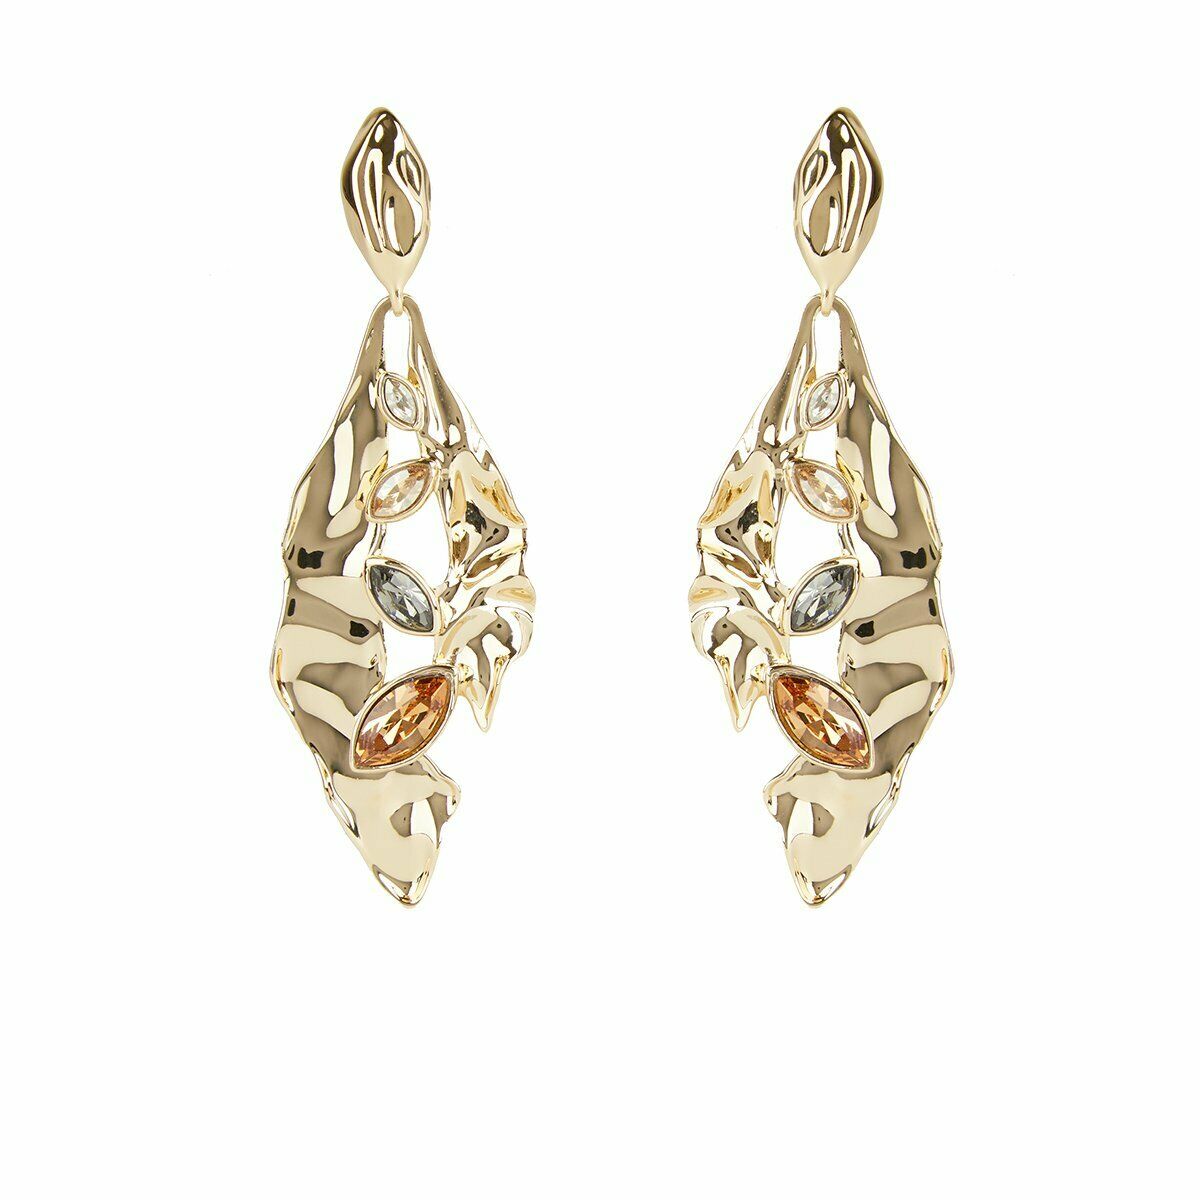 Alexis Bittar Stone Studded Crumpled Metal 14k Gold Plated Navette Earrings NWT